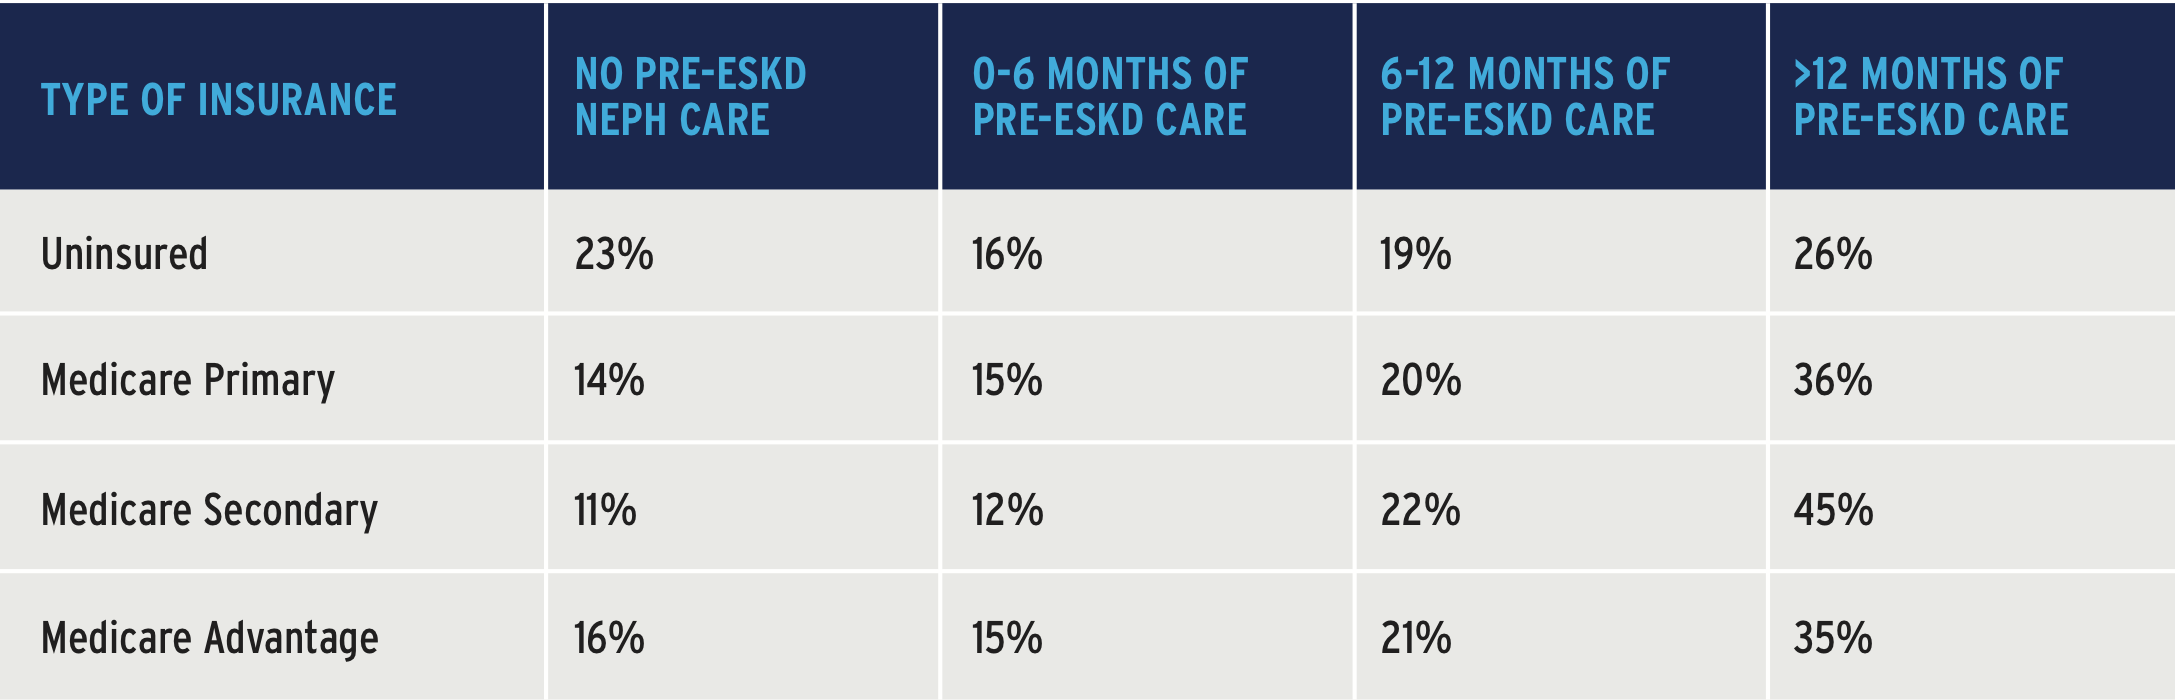 The approximate percent of patients starting ESKD with prior nephrology care based on insurance type.